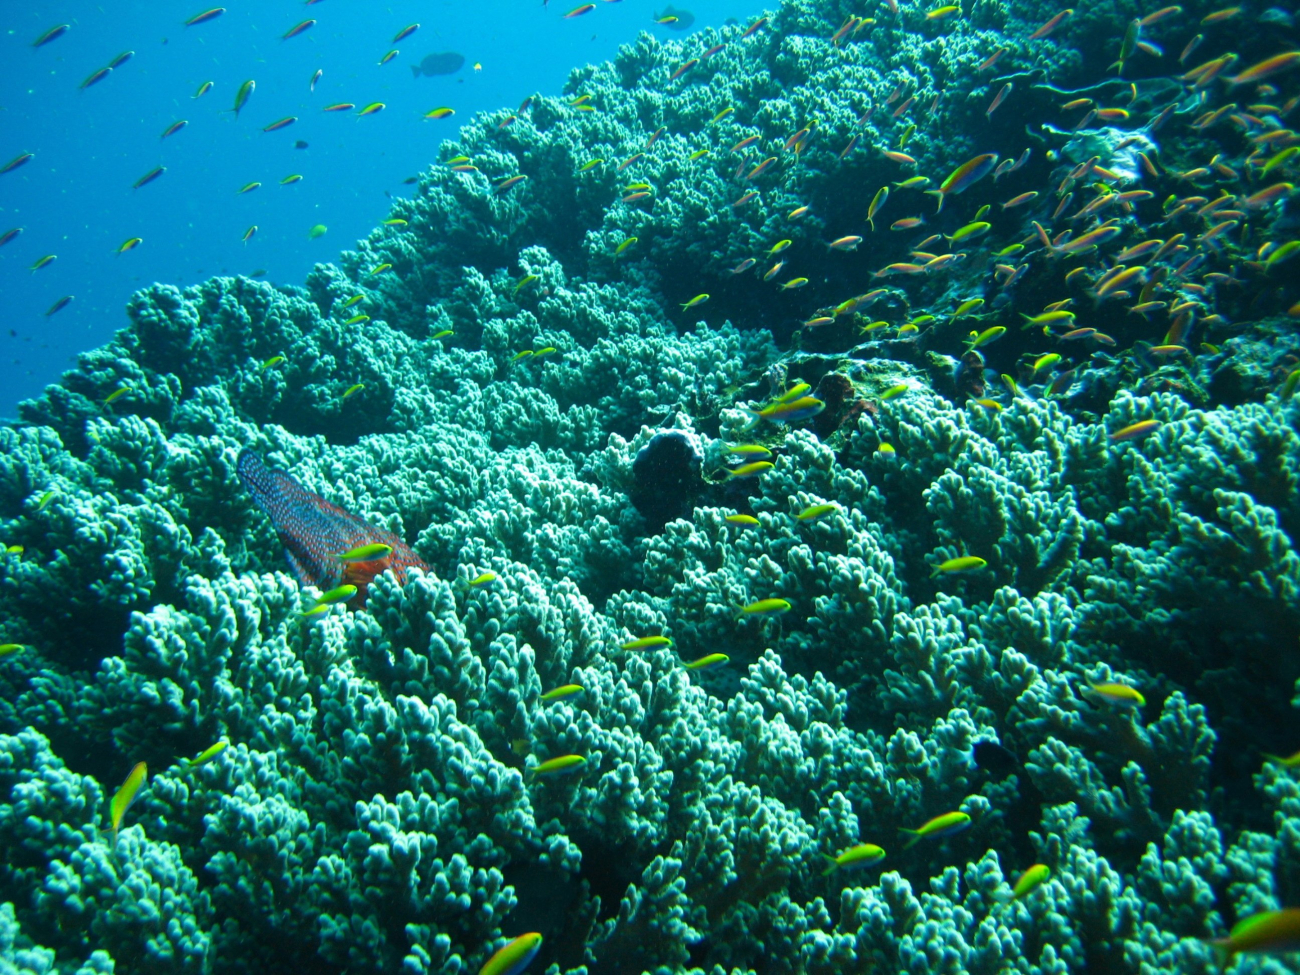 Reef scene with anthias and tail of large fish protruding from coral